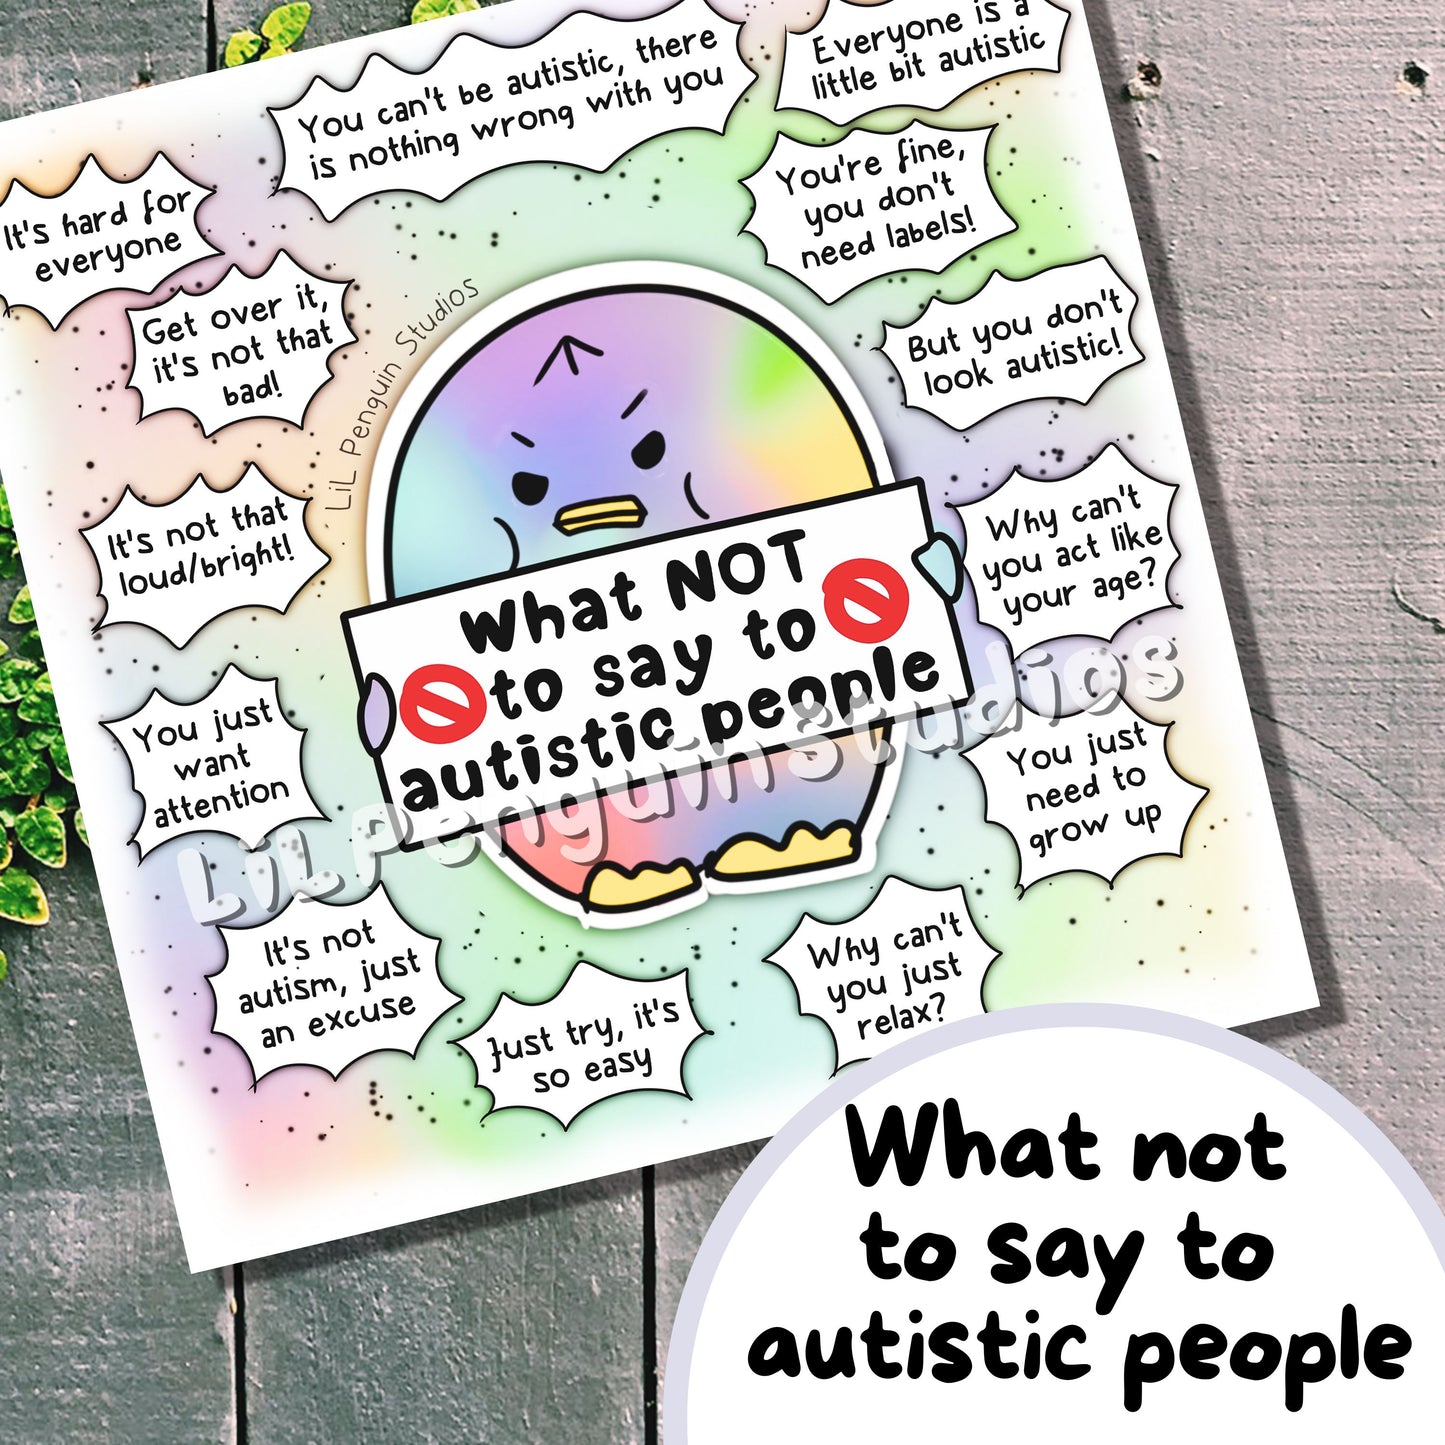 Autism Print (digital download only): Transcript: 🚫You can't be autistic, there is nothing wrong with you 🚫Everyone is a little bit autistic 🚫You're fine, you don't need such labels 🚫But you don't look autistic 🚫Why can't you act like your age? 🚫Why can't you just relax? 🚫You just need to grow up! 🚫Just try harder, it's so easy 🚫It's not autism, just an excuse 🚫You just want attention 🚫It's not that loud/bright! 🚫Get over it, it's not that bad! 🚫It's hard for everyone